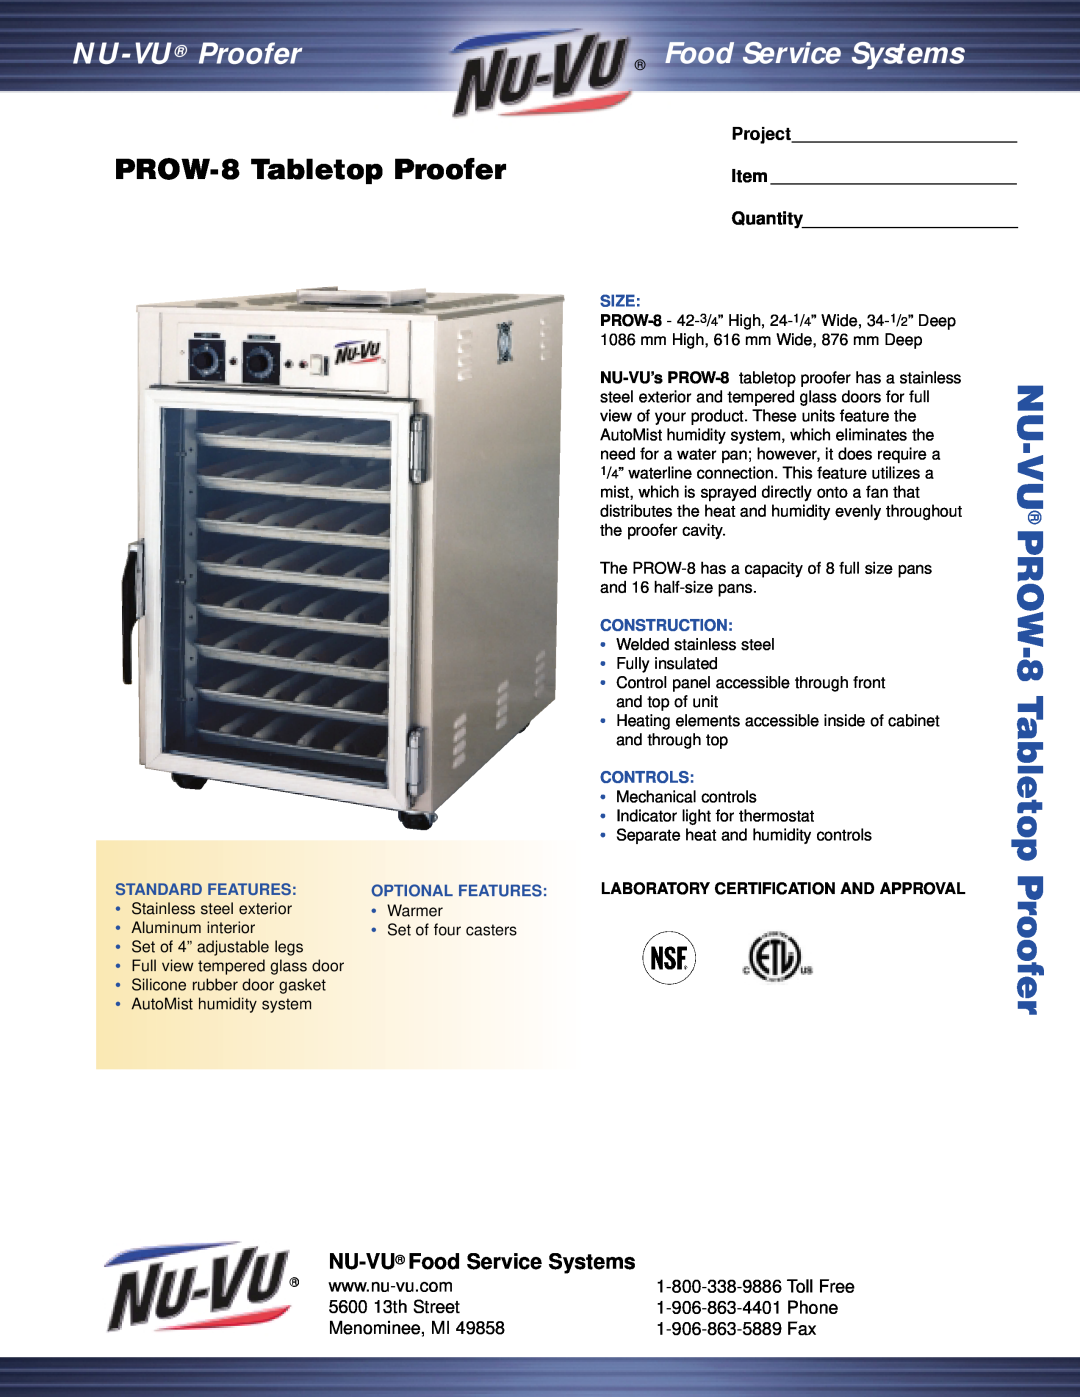 Nu-Vu manual PROW-8Tabletop Proofer, NU-VU Food Service Systems, 1-800-338-9886Toll Free, 5600 13th Street, Phone, Size 